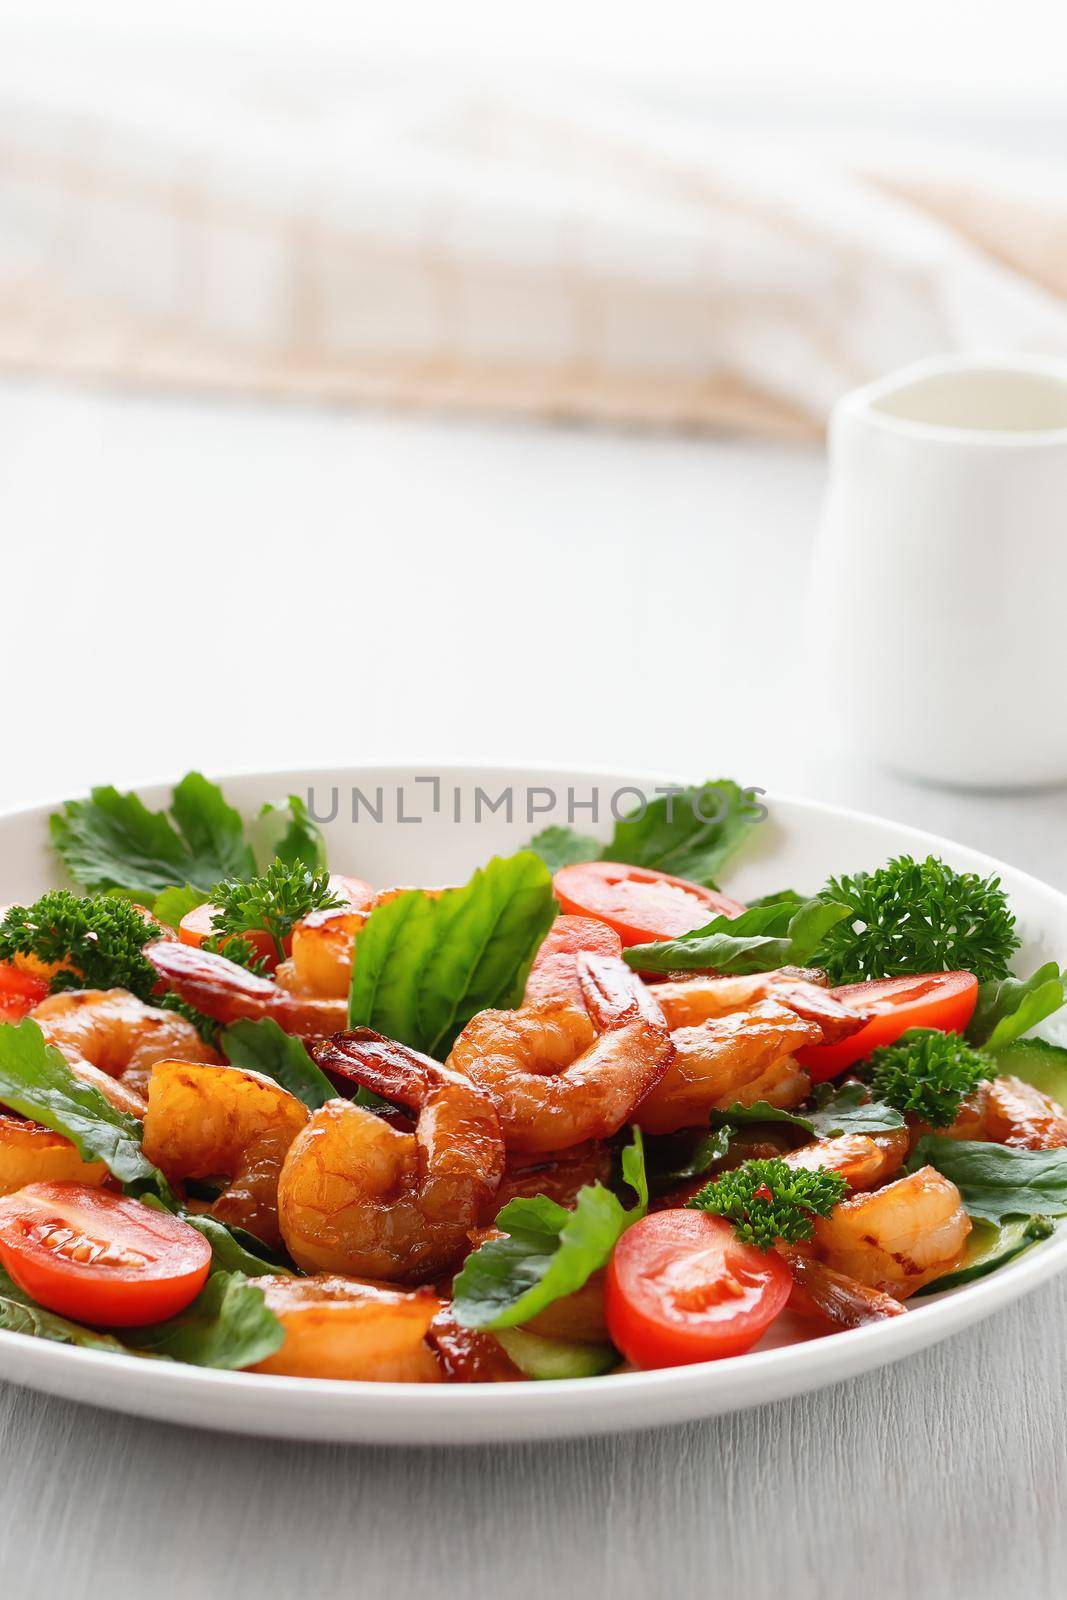 Fresh salad of shrimps, tomatoes, arugula and herbs on a white plate, vertical image.